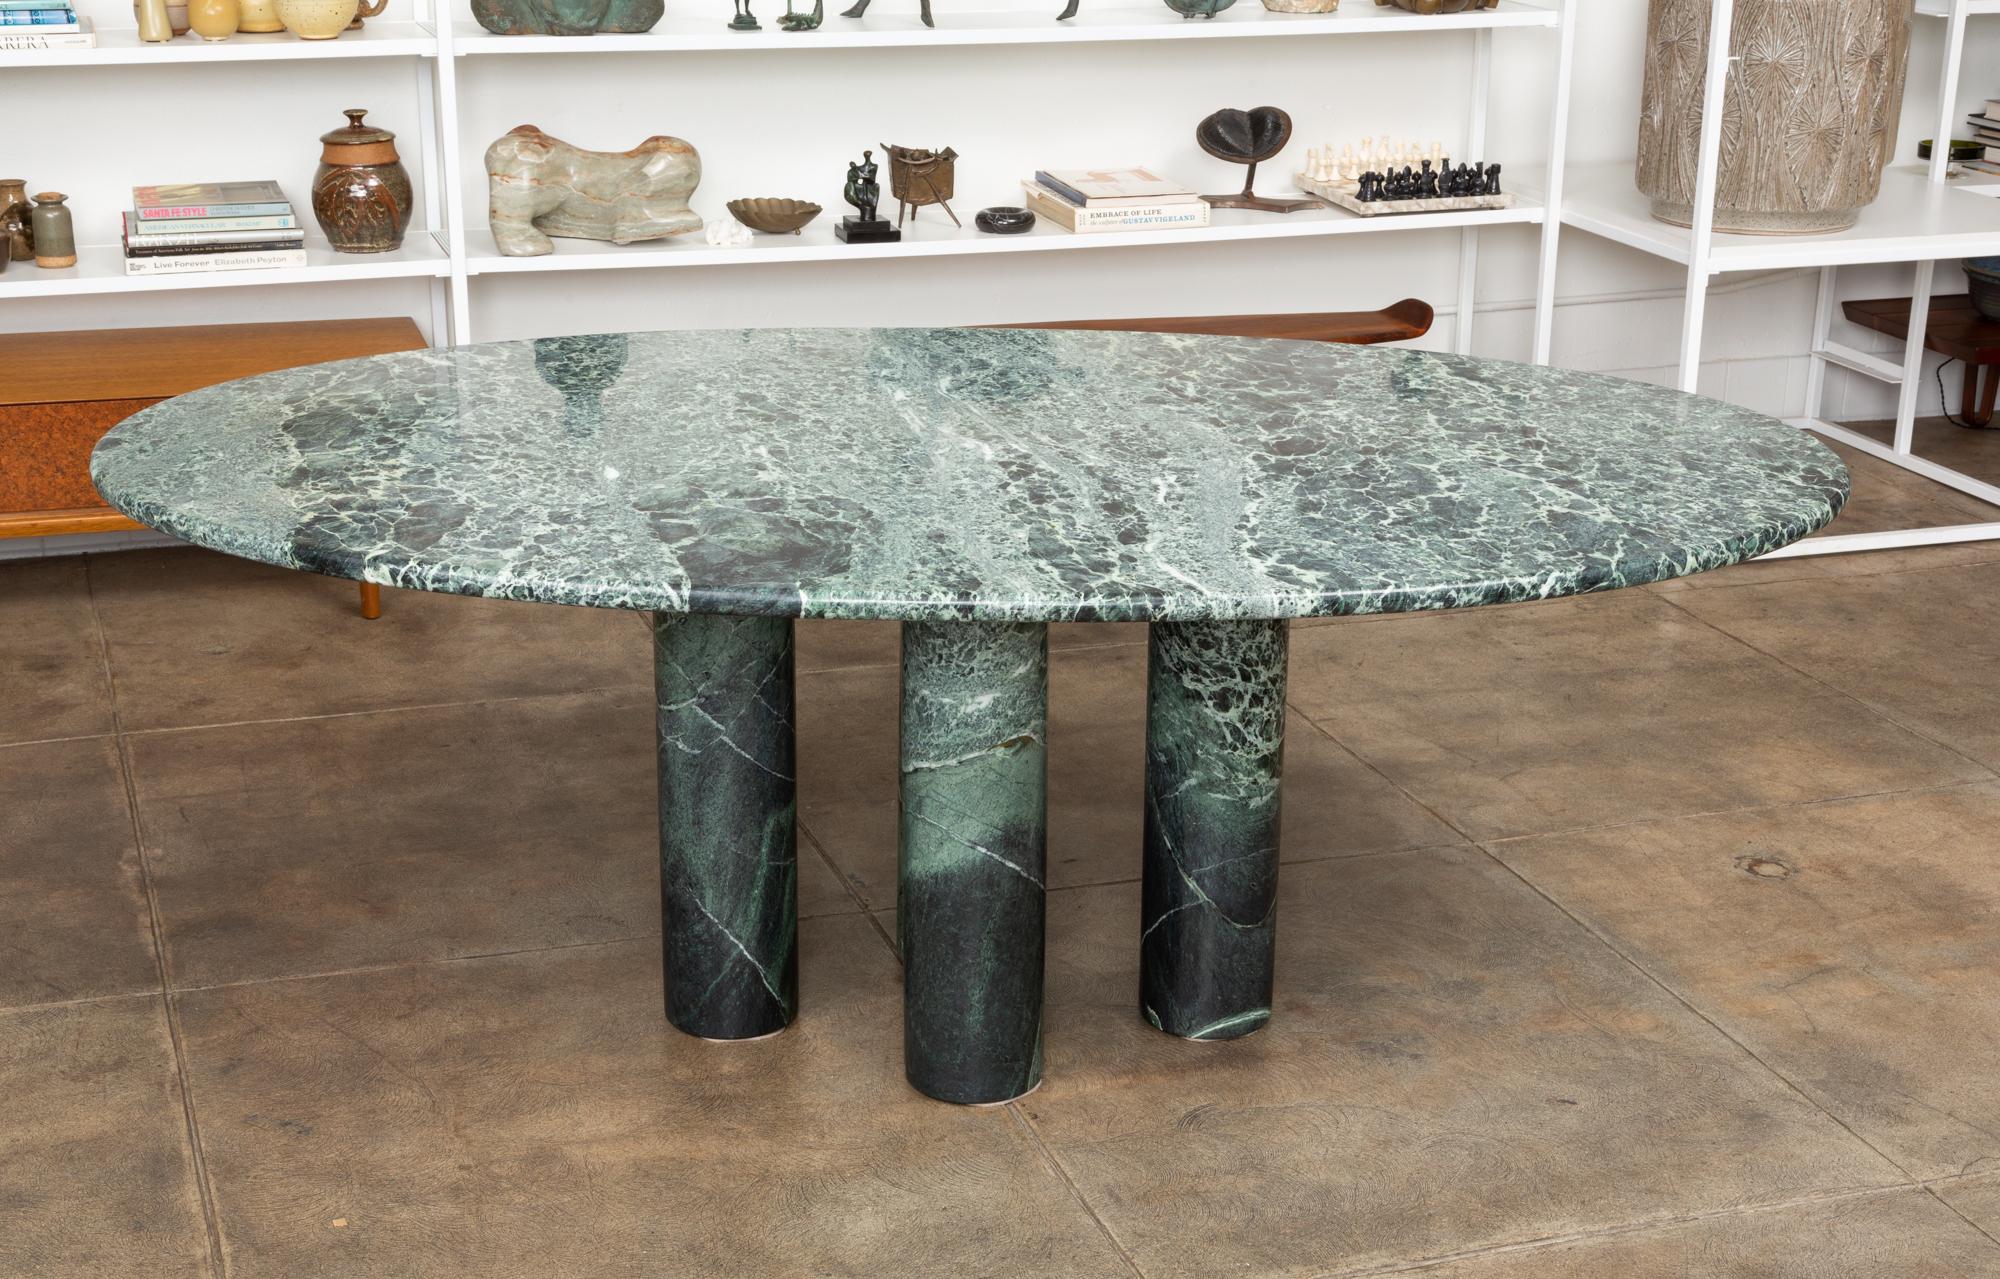 'Il Colonnato' oval dining table in green marble by Mario Bellini for Cassina. The table features an oval horse track top in green marble with distinct white veining. The upper portion of the four thick column legs also has the vibrant white veining